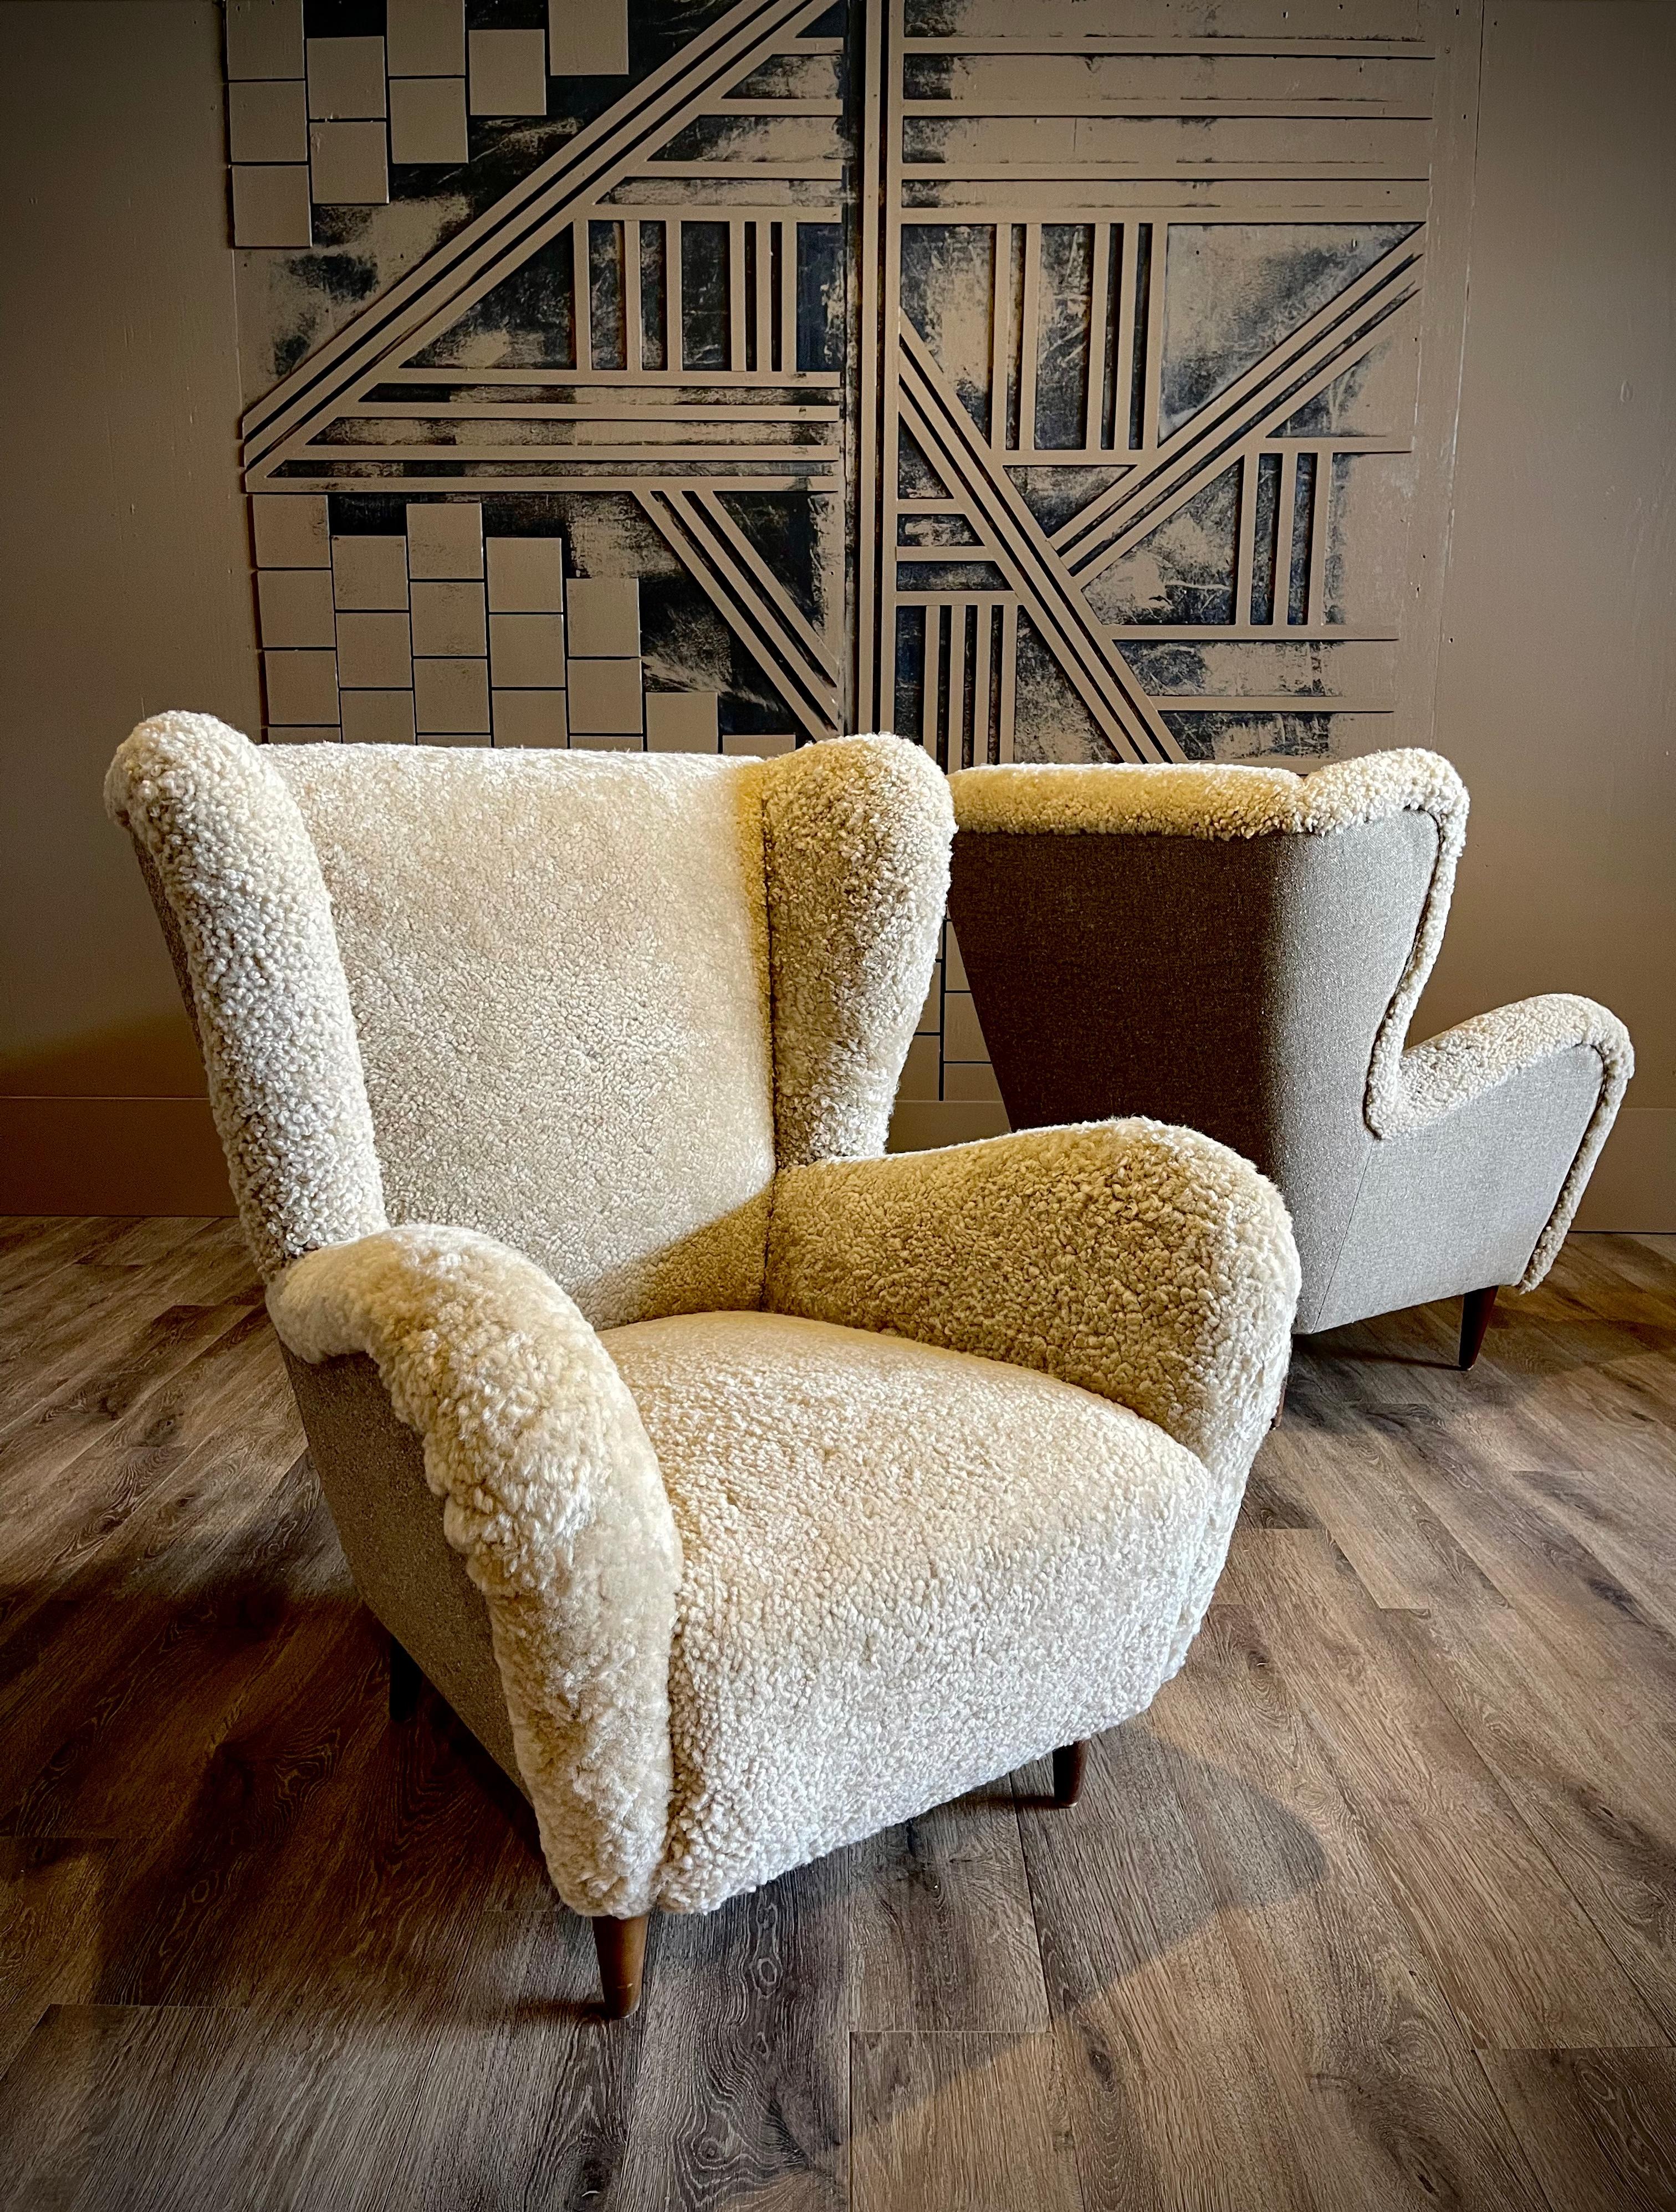 Meet Giovanni…it’s not just what’s on the outside, but what’s on the inside that counts. Except in this case. It ALL counts. How can anyone resist a good looking Italian.

These fabulous wingbacks attributed to Gio Ponti have gone through a full